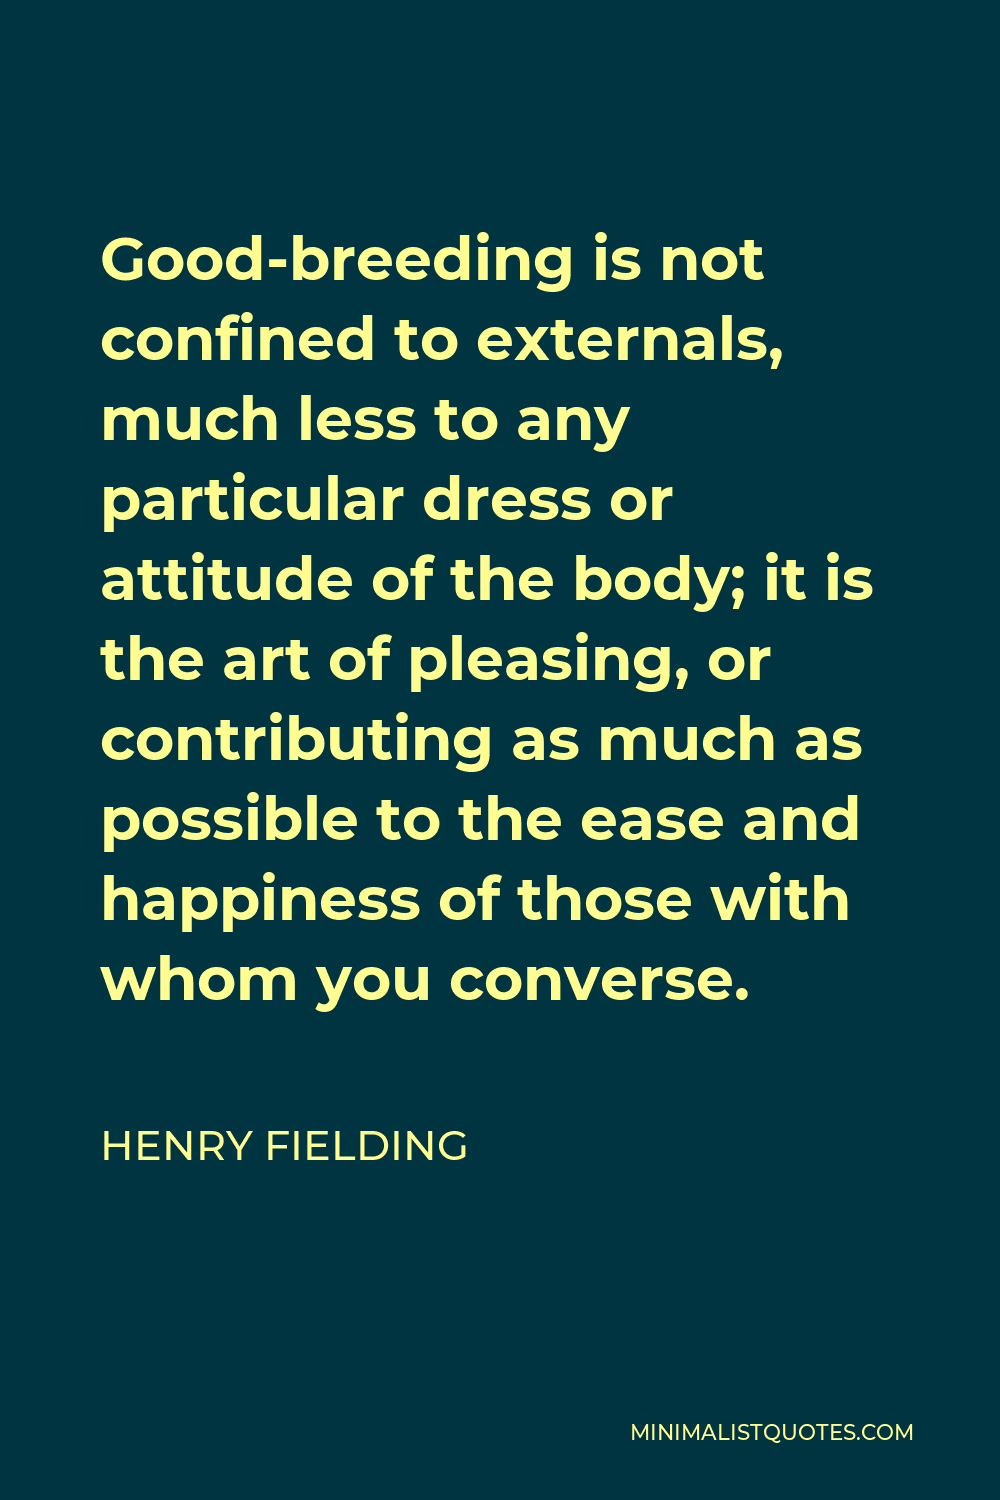 Henry Fielding Quote - Good-breeding is not confined to externals, much less to any particular dress or attitude of the body; it is the art of pleasing, or contributing as much as possible to the ease and happiness of those with whom you converse.